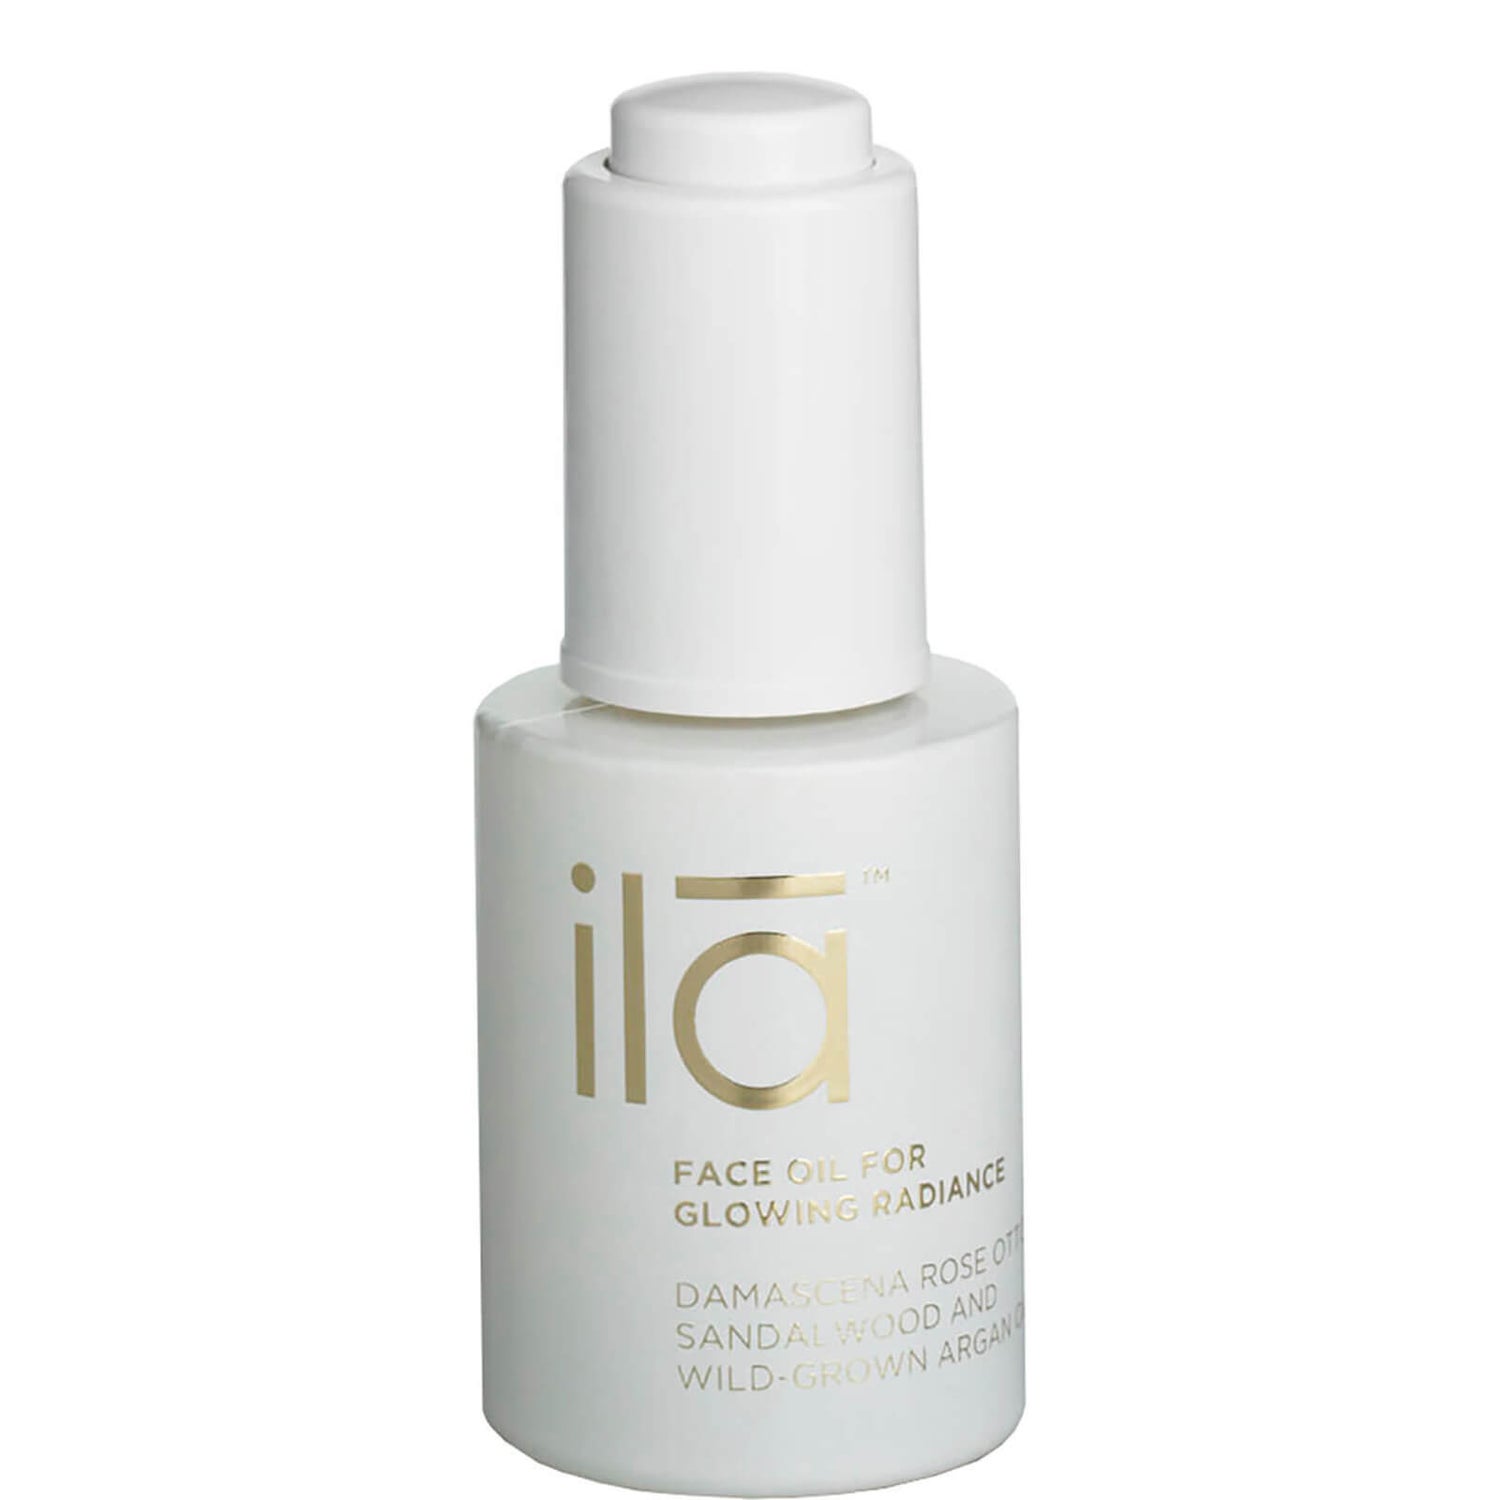 ila-spa Face Oil for Glowing Radiance 1 oz